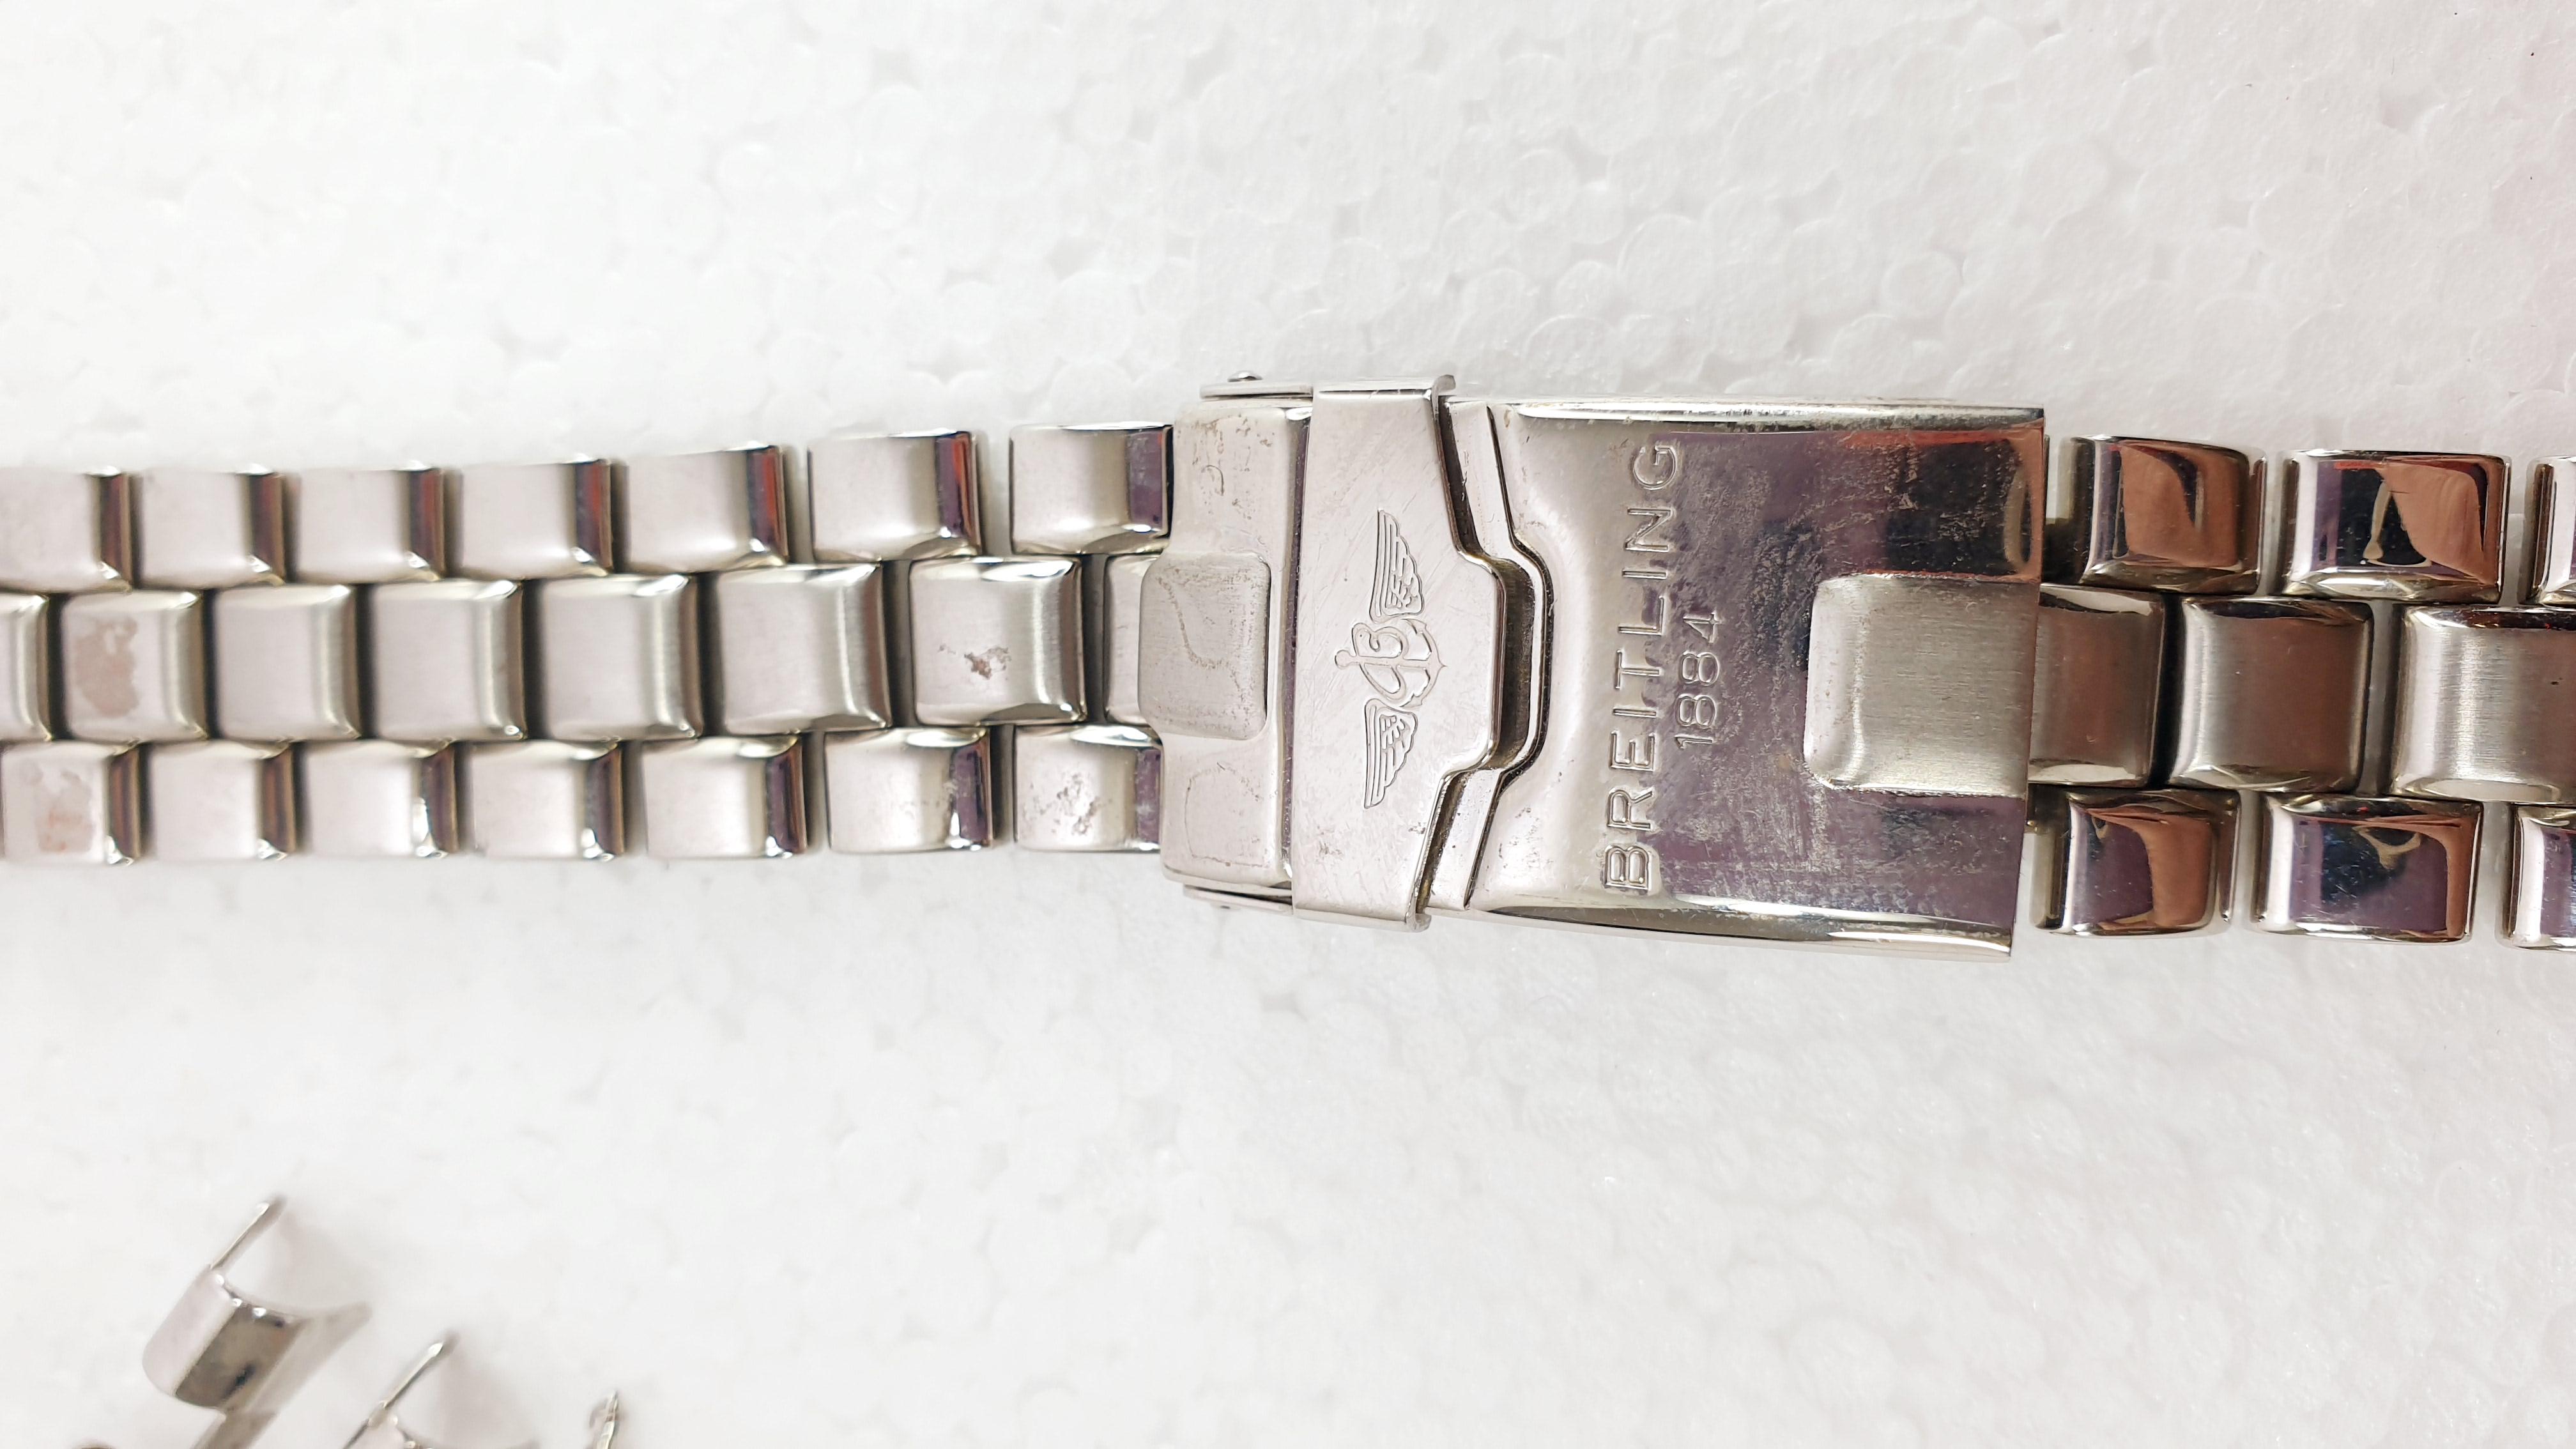 24mm Stainless Steel Breitling Bracelet Strap for Breitling Watch Band with Breitl Clasp/Folding Buckle

24mm stainless steel strap for your Breitling watch with straight end links.
Information
Handmade item
Material: Stainless Steel

Breitling SA